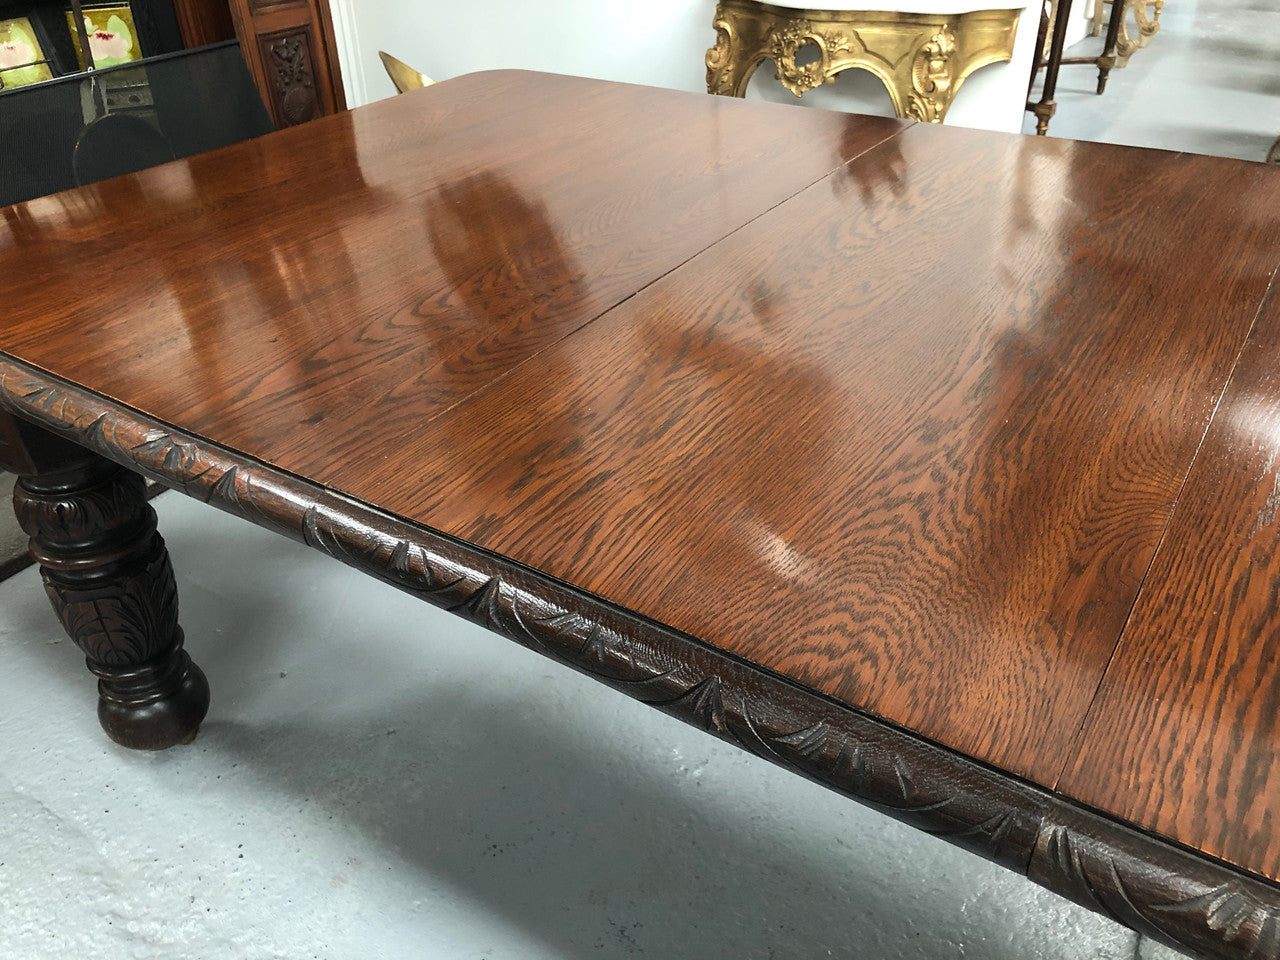 Lovely Antique Tudor Style oak extension table with 3 leaves in good detailed condition.